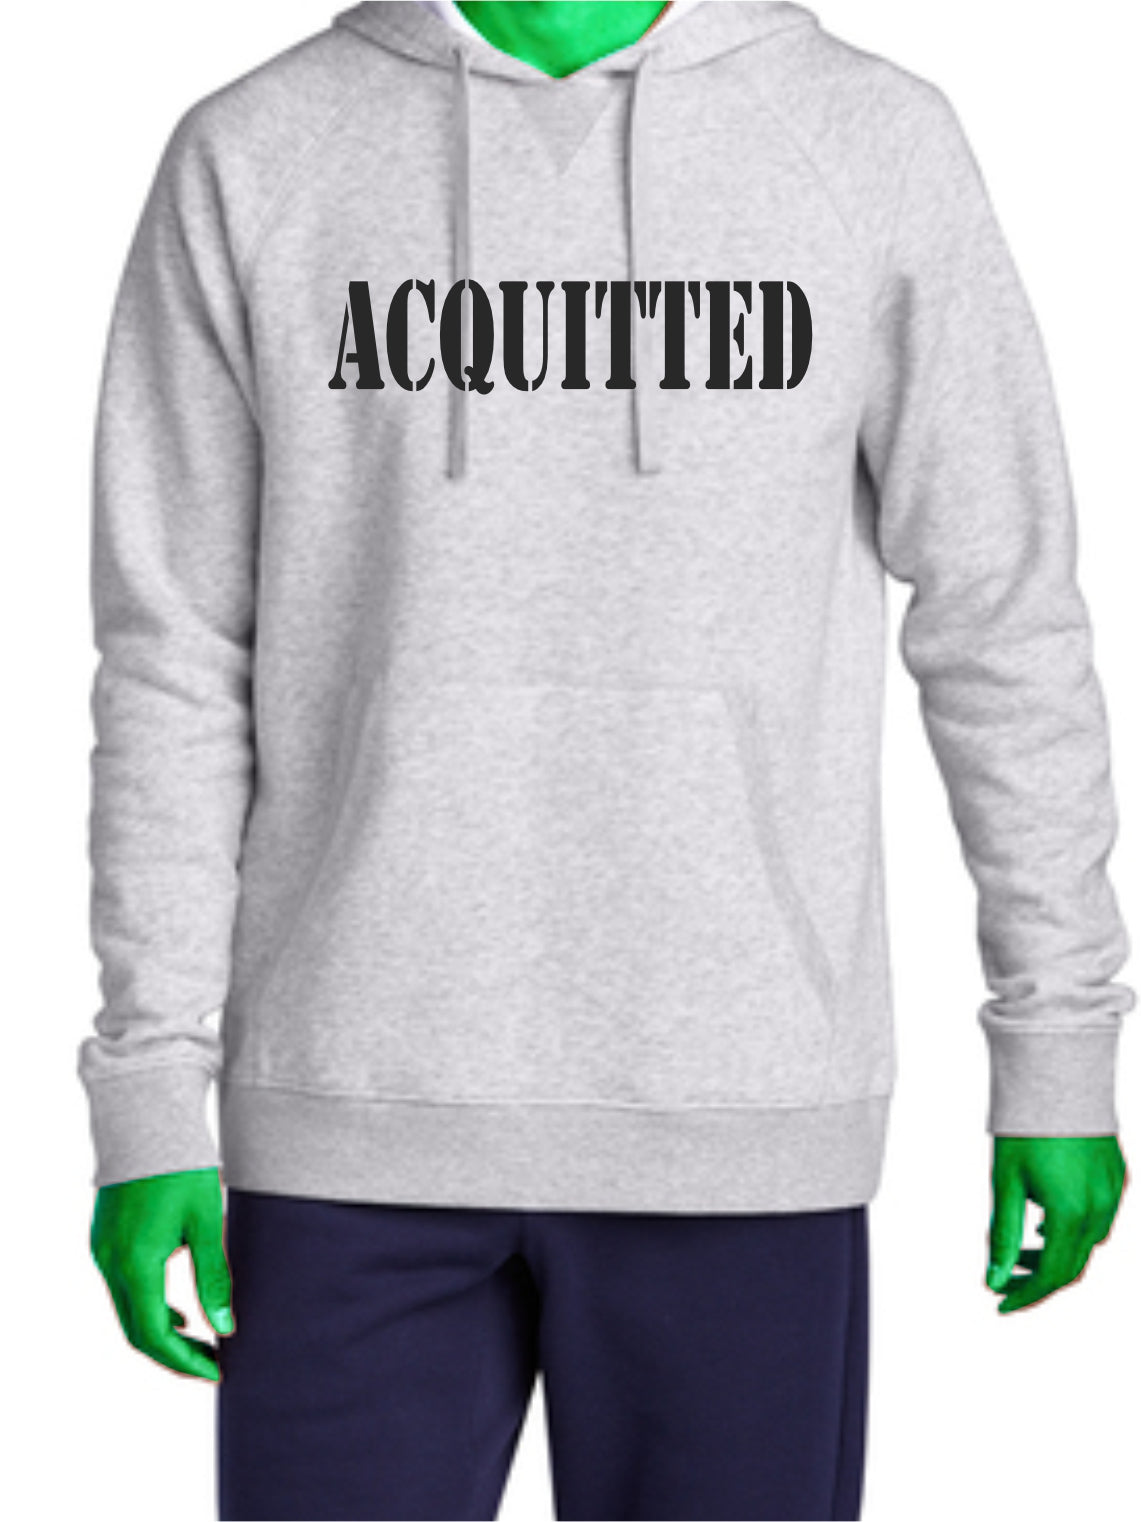 Acquitted of a Crime Hooded Sweatshirt